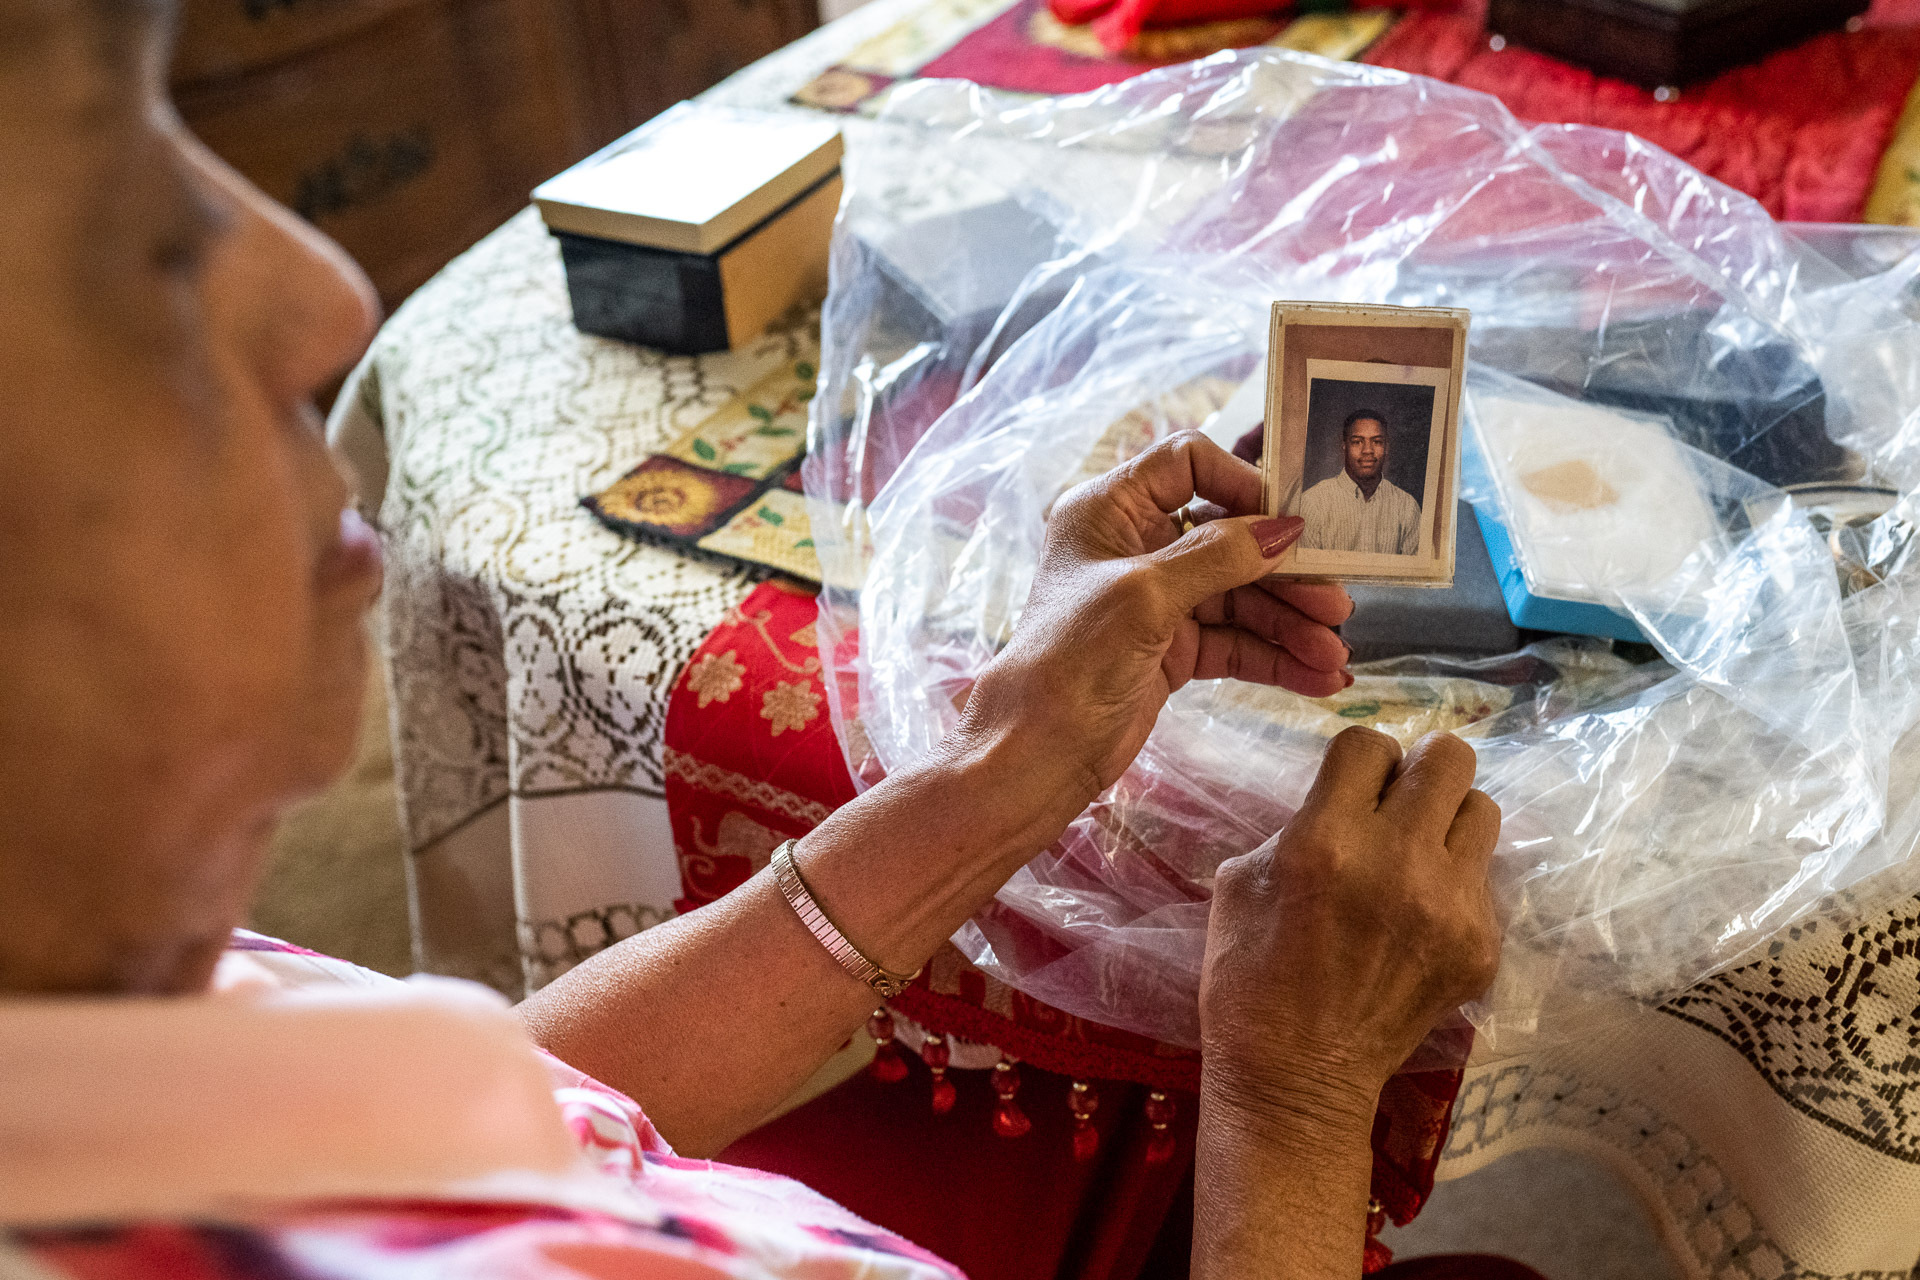 An African American woman looks at a photo of a young African American man while seated at a table at home.